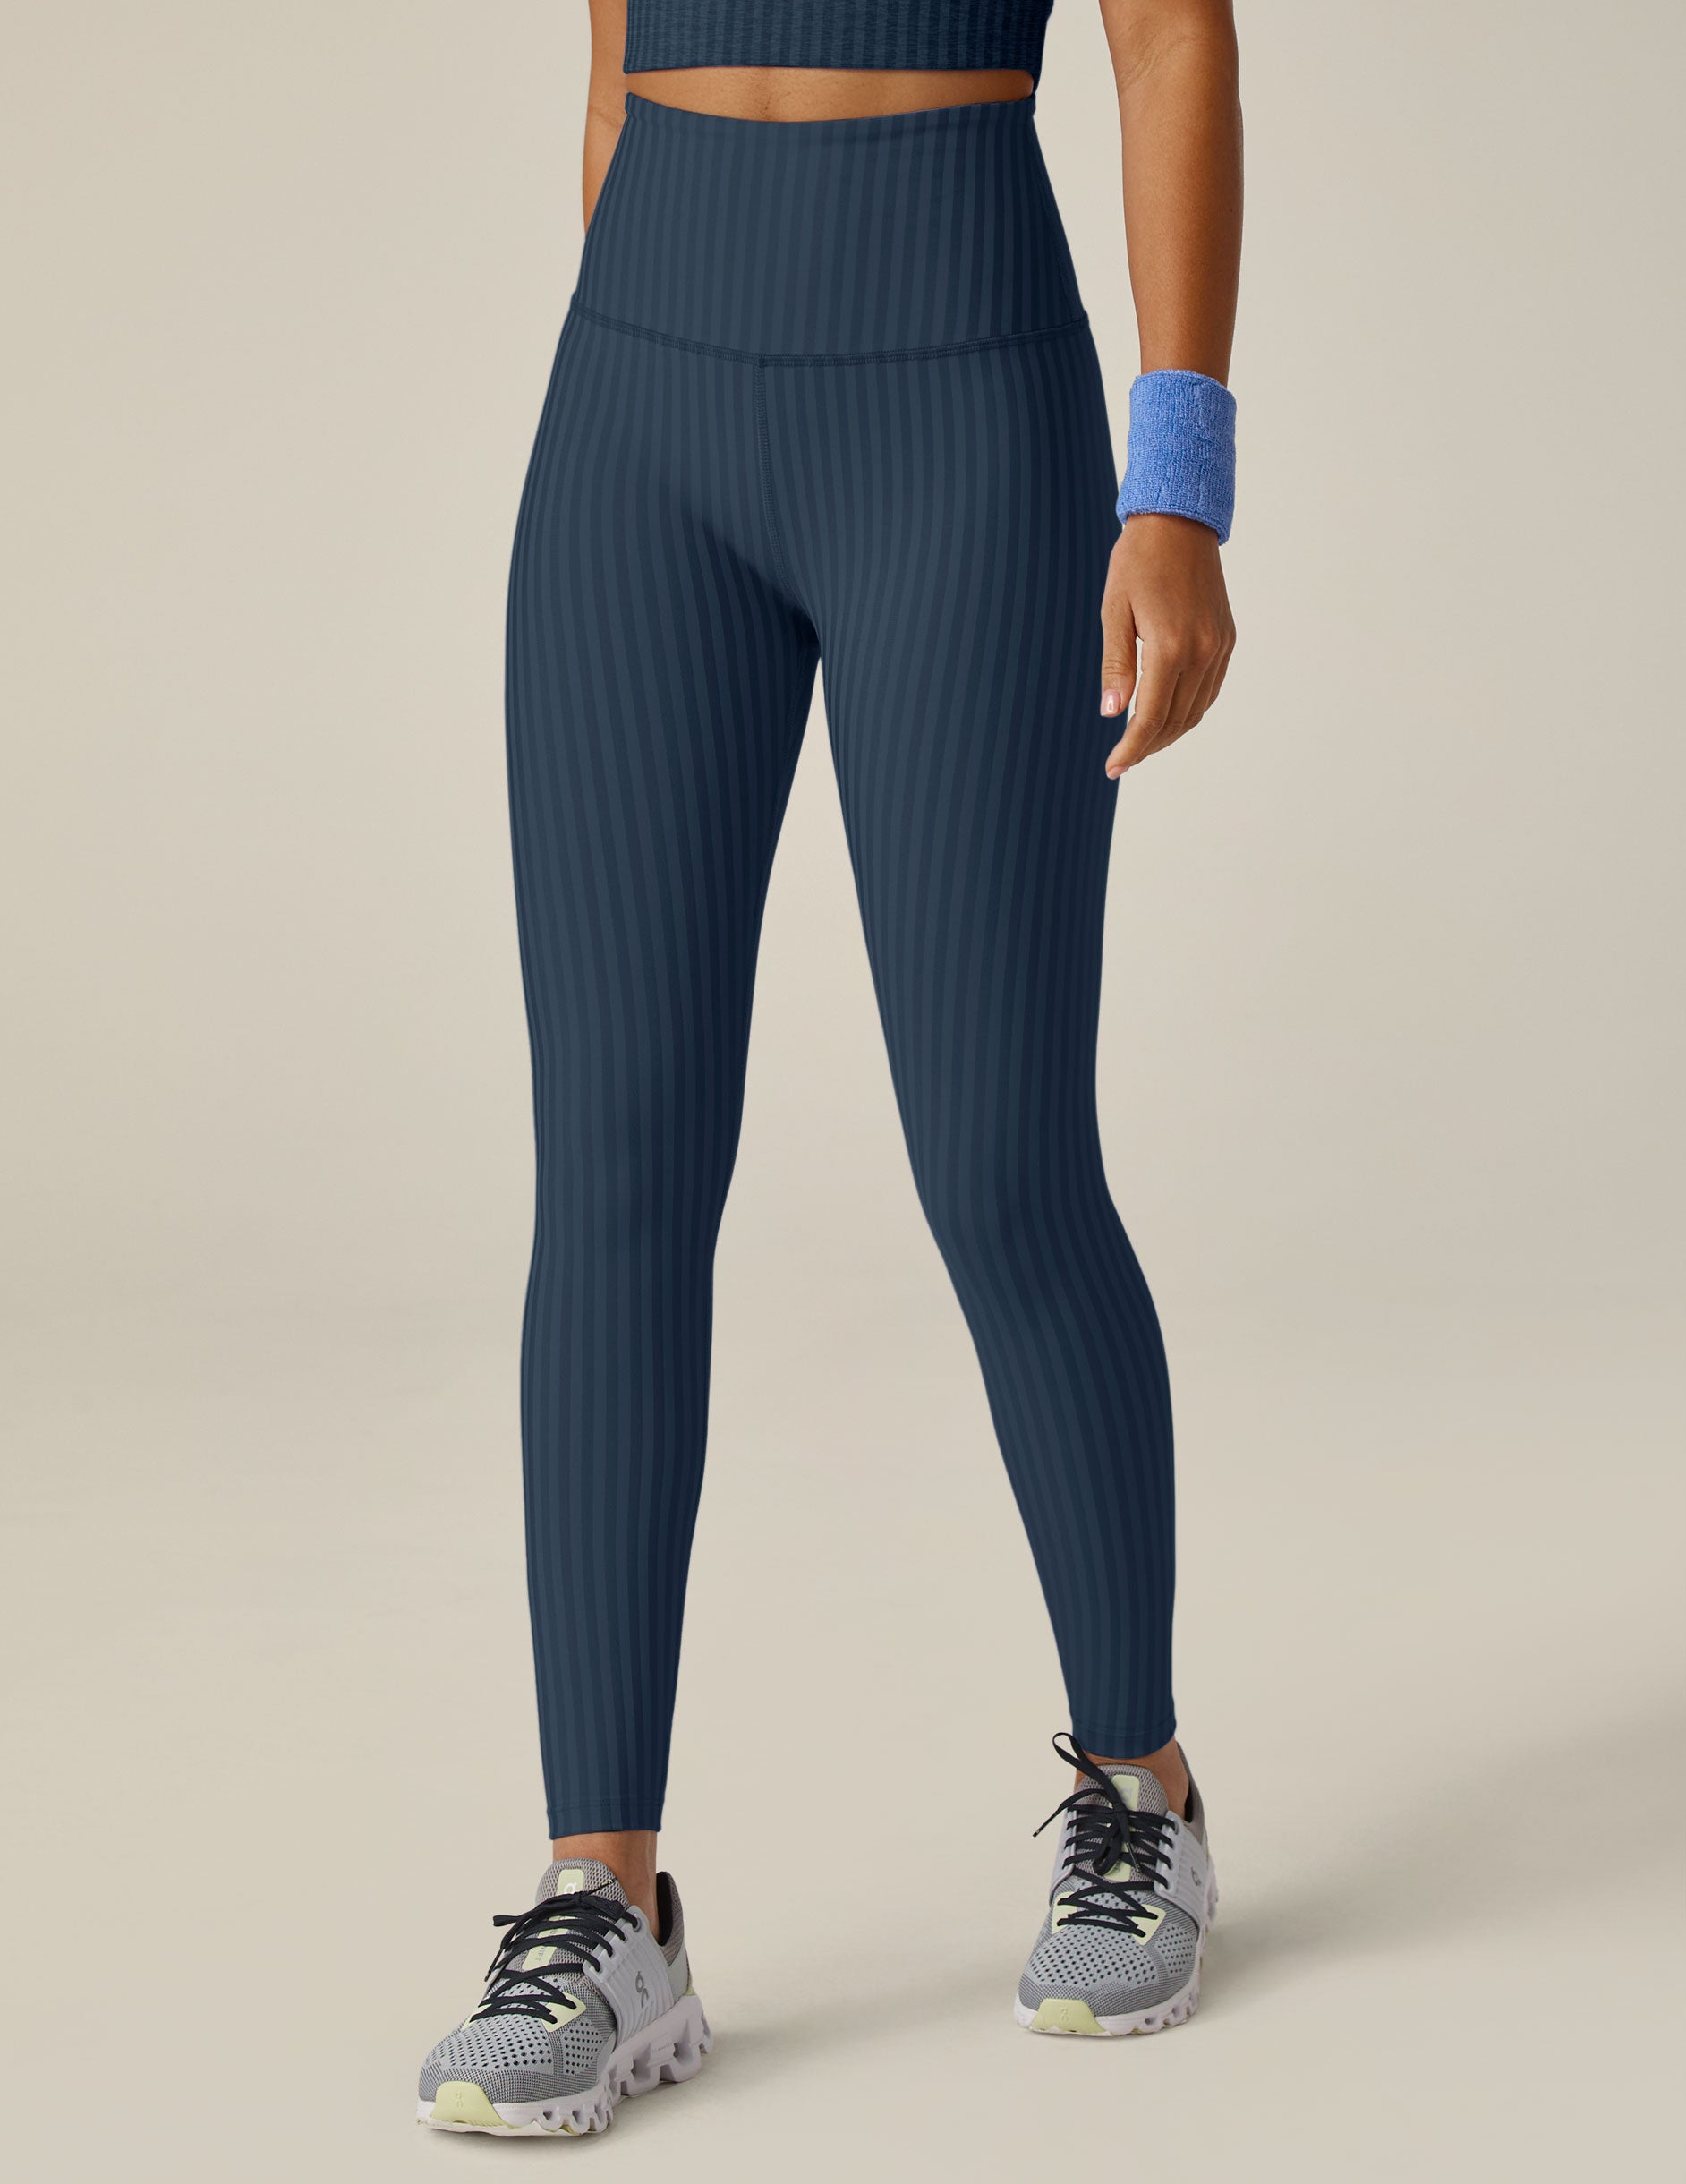 Zathe Navy Blue and White Stripes Yoga Leggings for Women with Pockets  Pants Stretchy High Waisted Pants for Women X-Small, Multicolored,  X-Small/2 Inseam : : Clothing, Shoes & Accessories